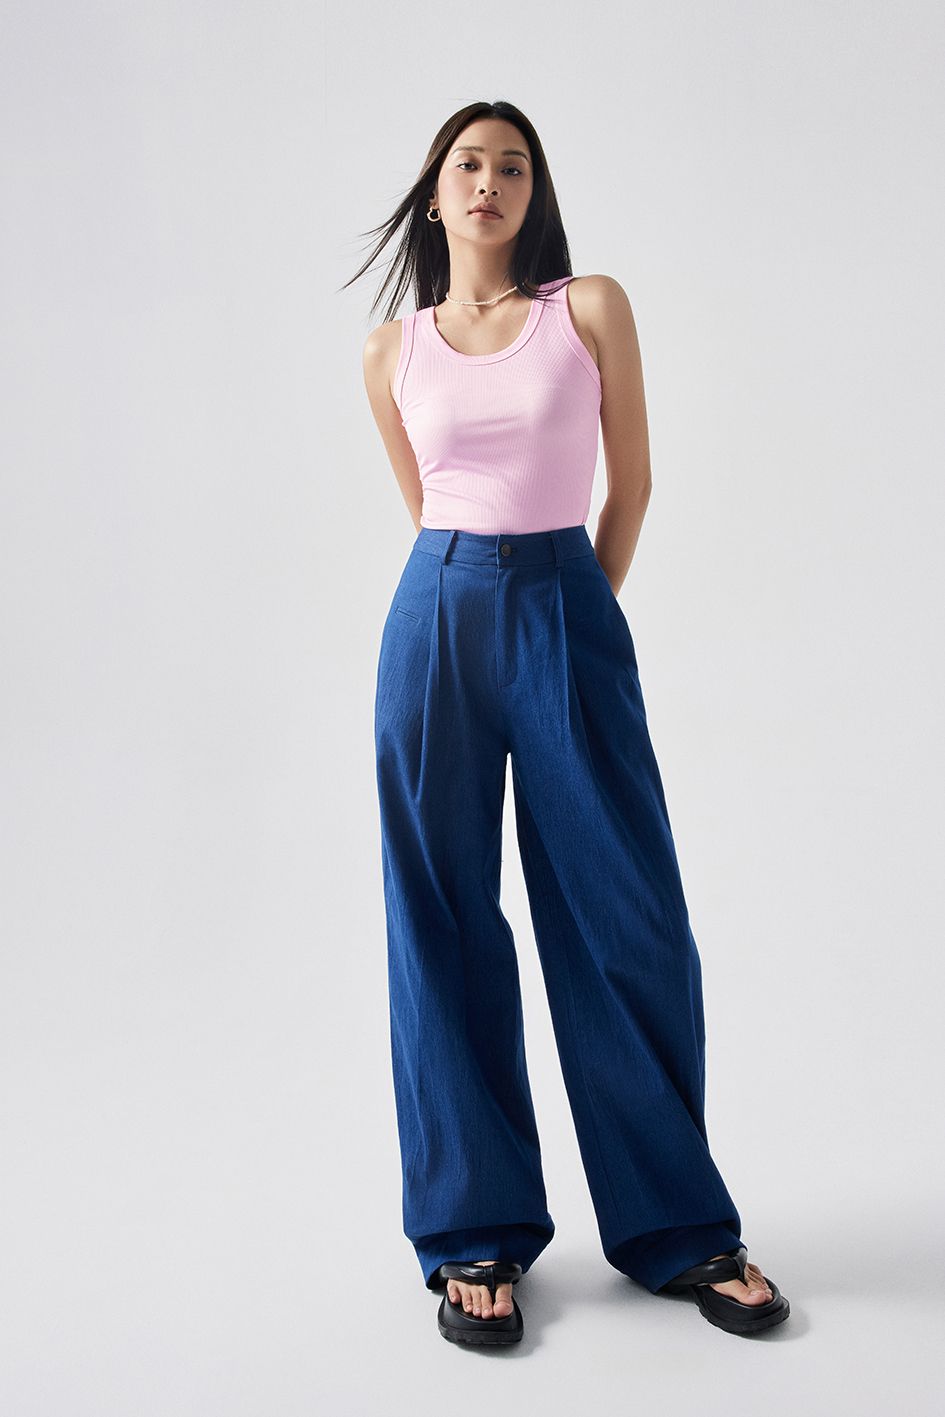 The Daily ribbed stretch cotton tank - Reina Pleated Wide leg Denim Pants